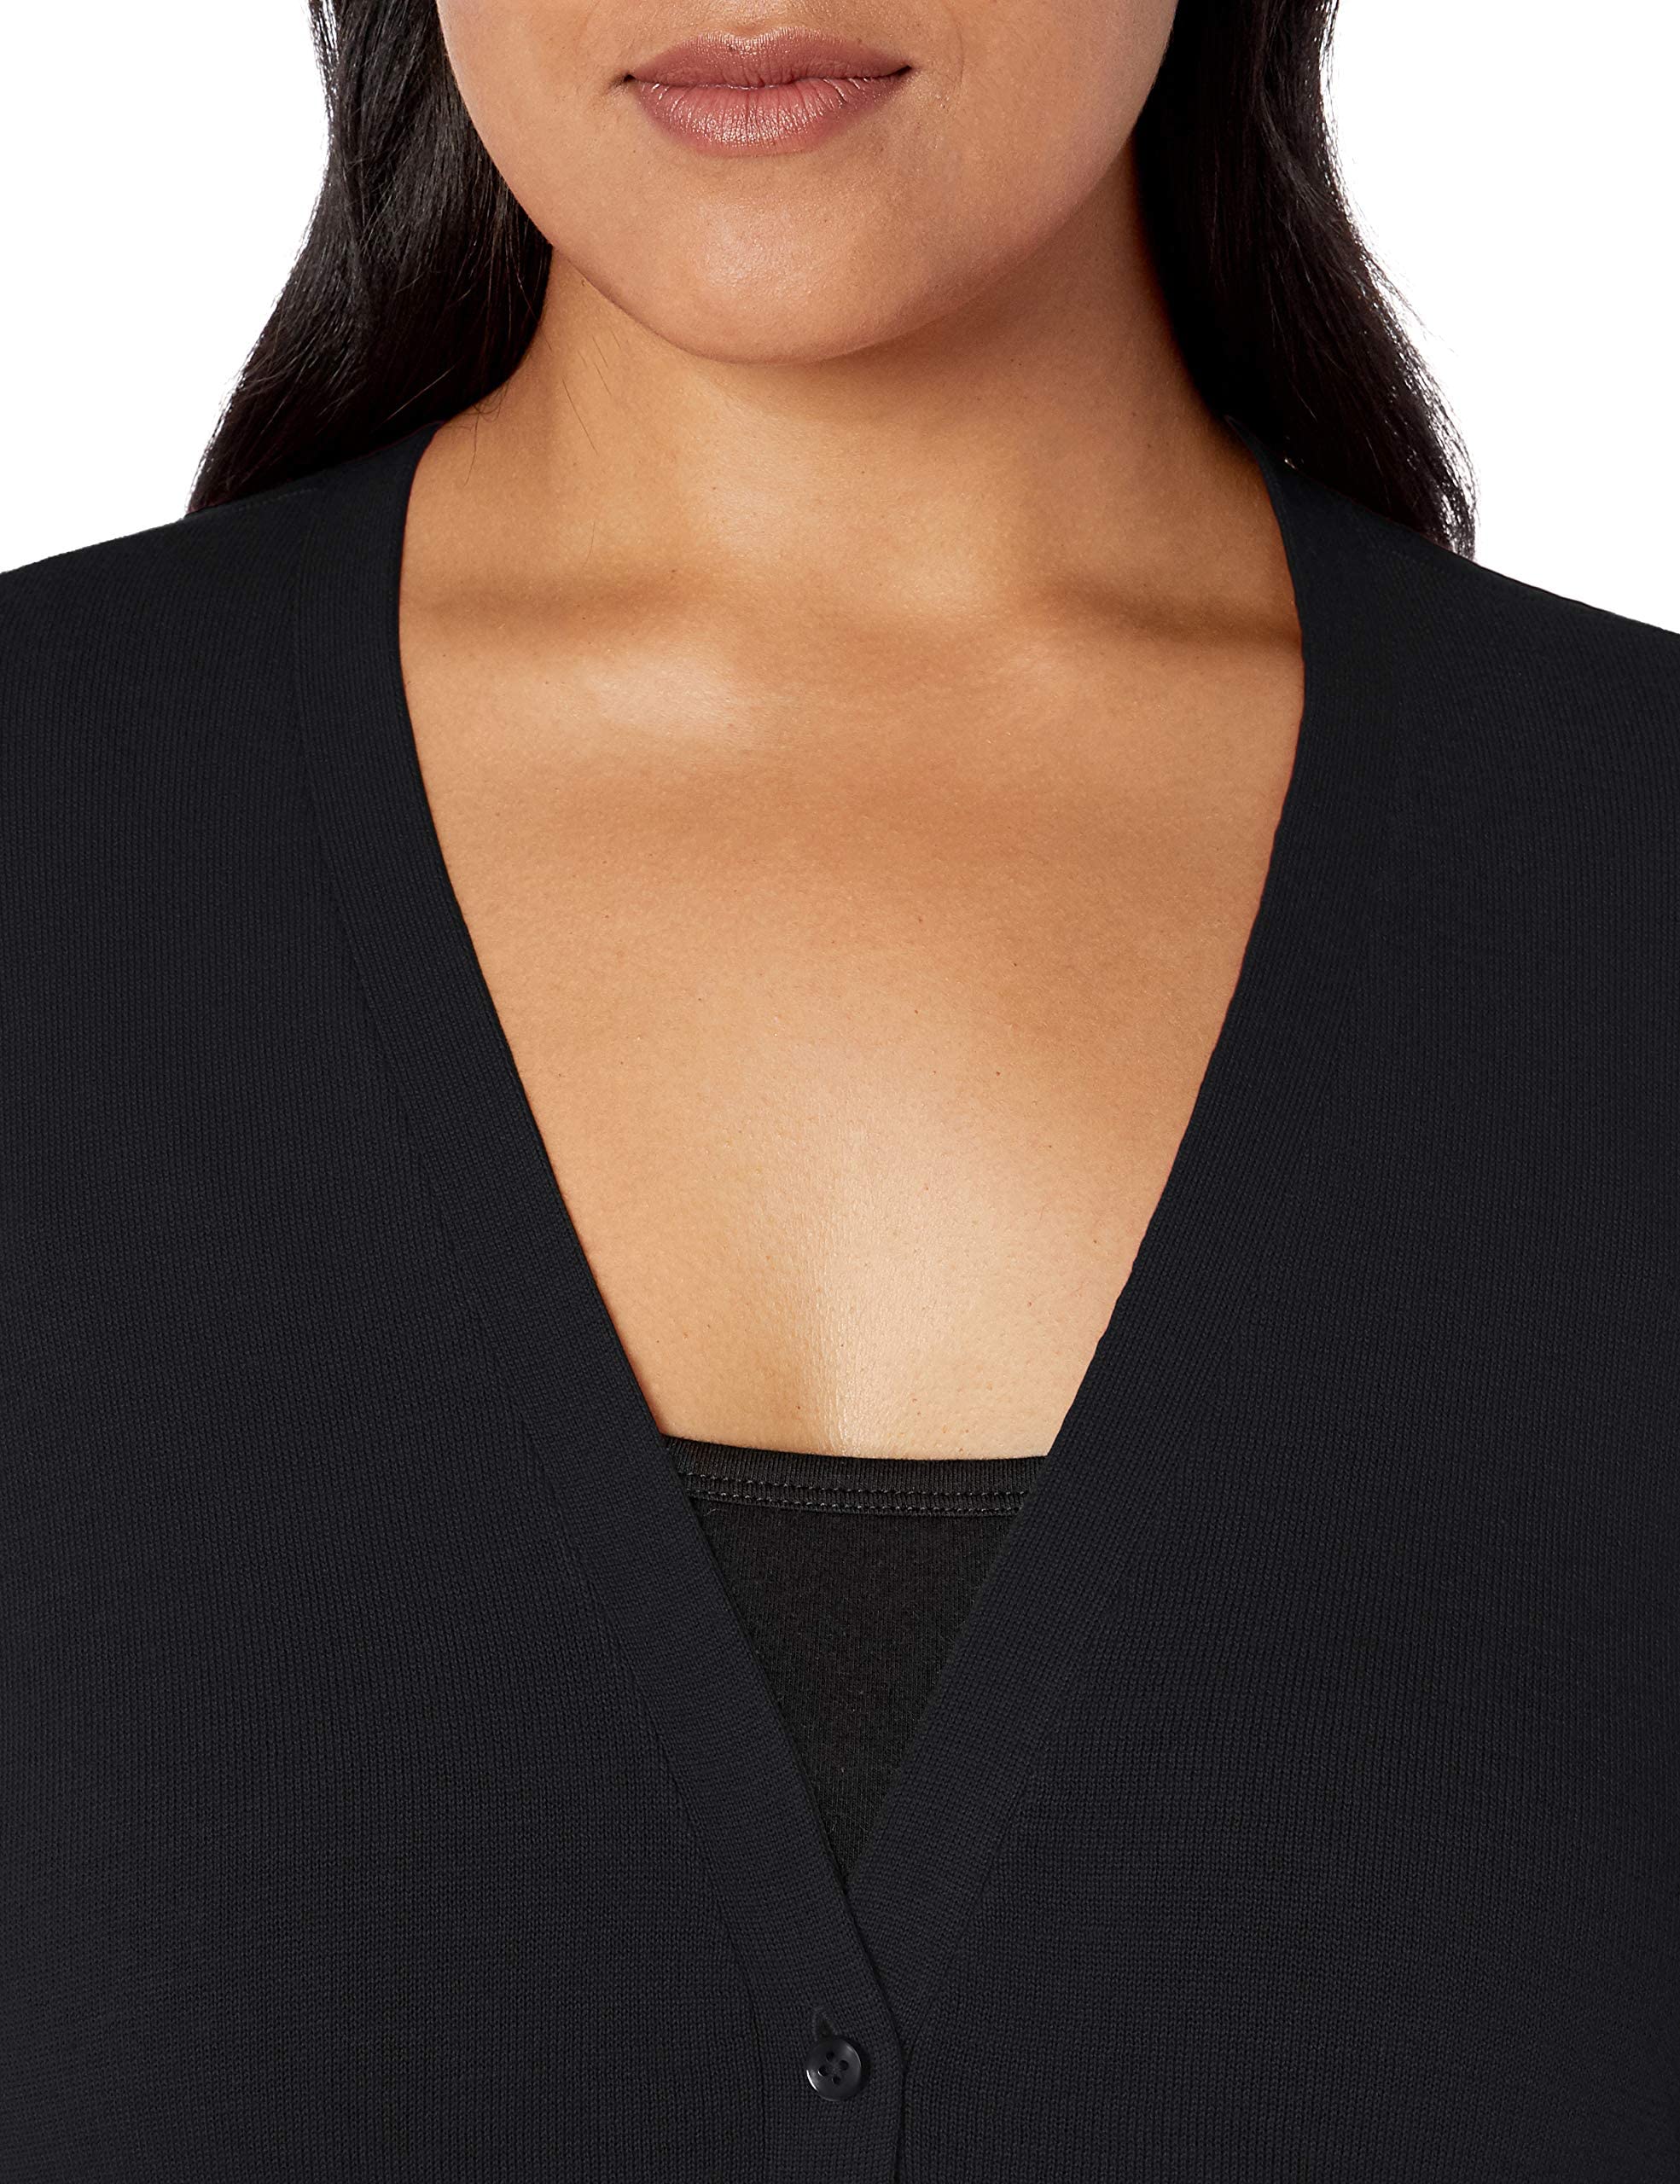 Amazon Essentials Women's Lightweight Vee Cardigan Sweater (Available in Plus Size), Black, Large